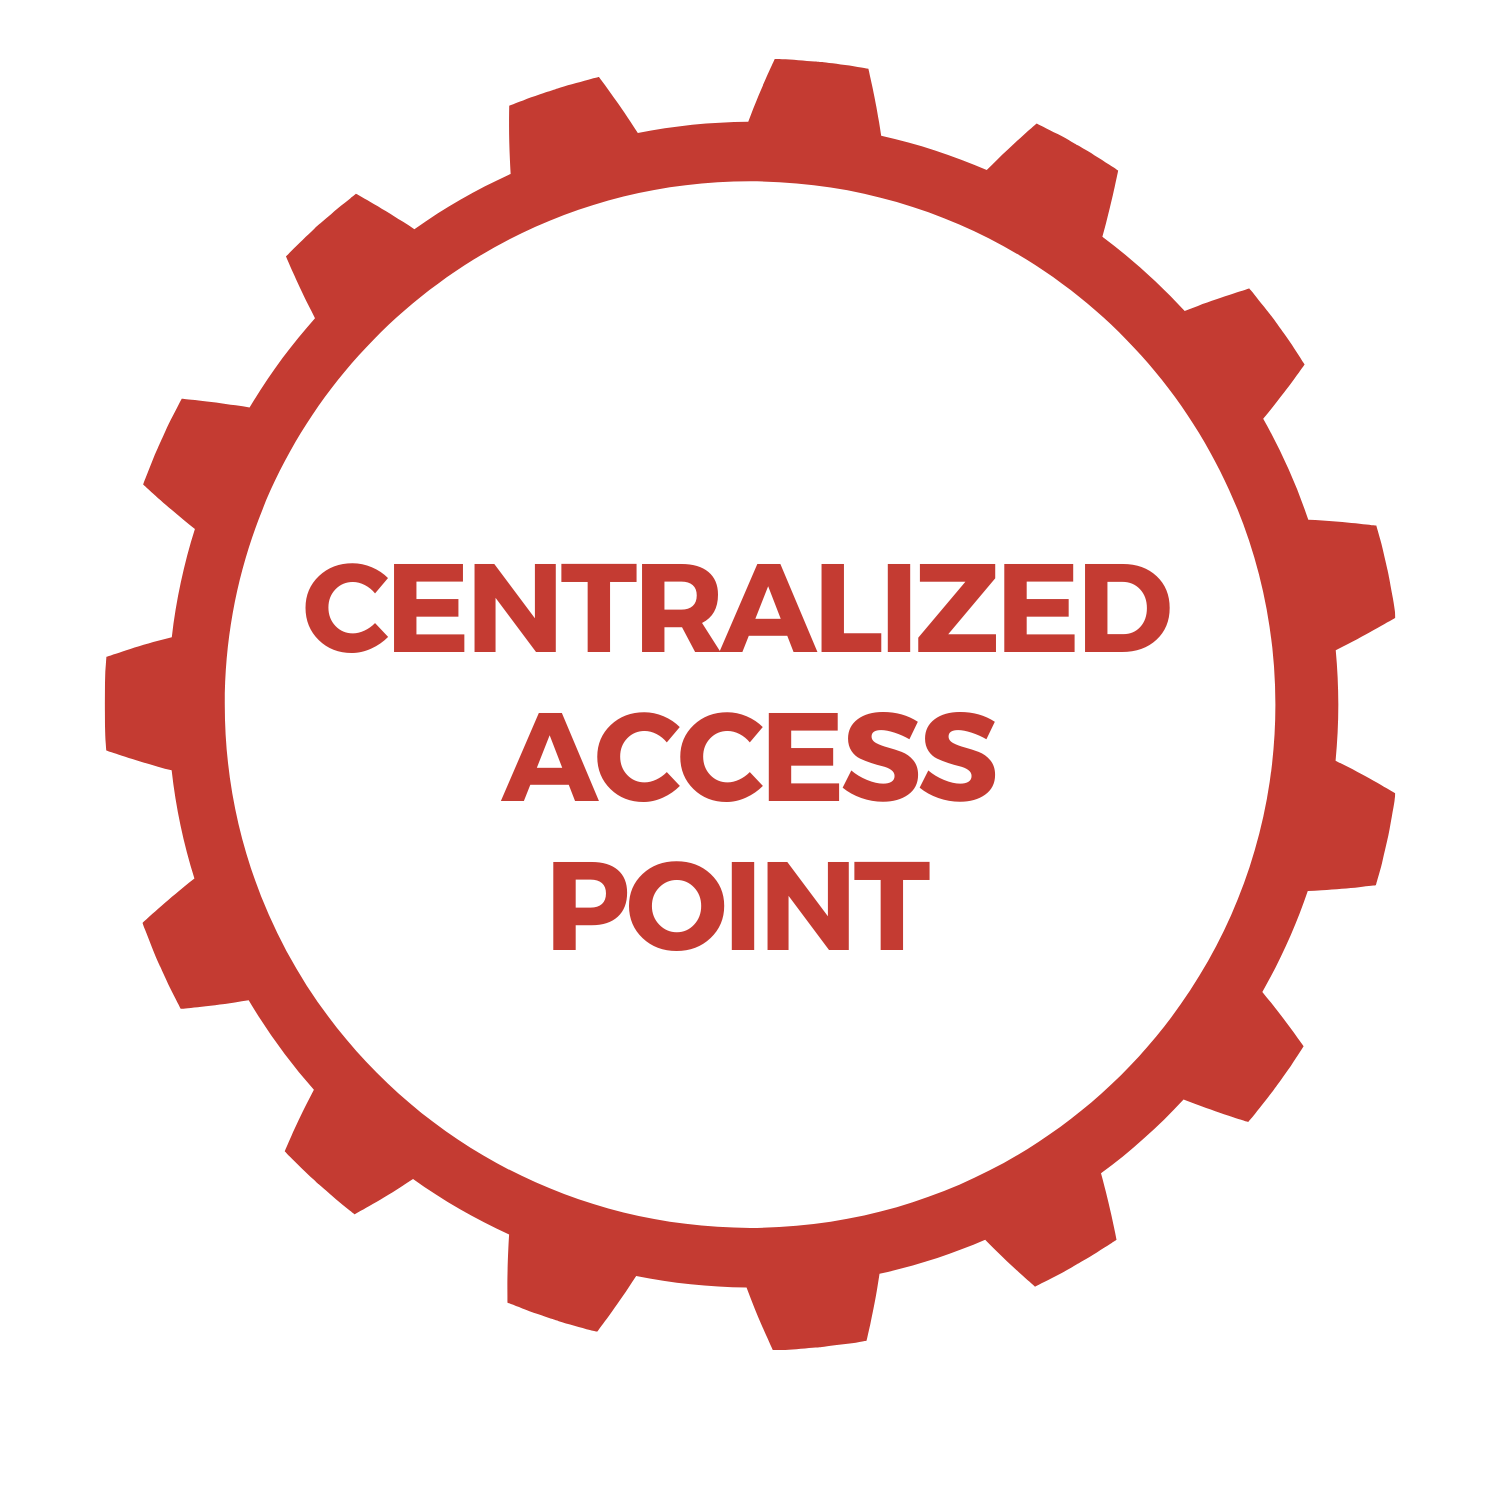  Image of a red gear with Centralized Access Point written 